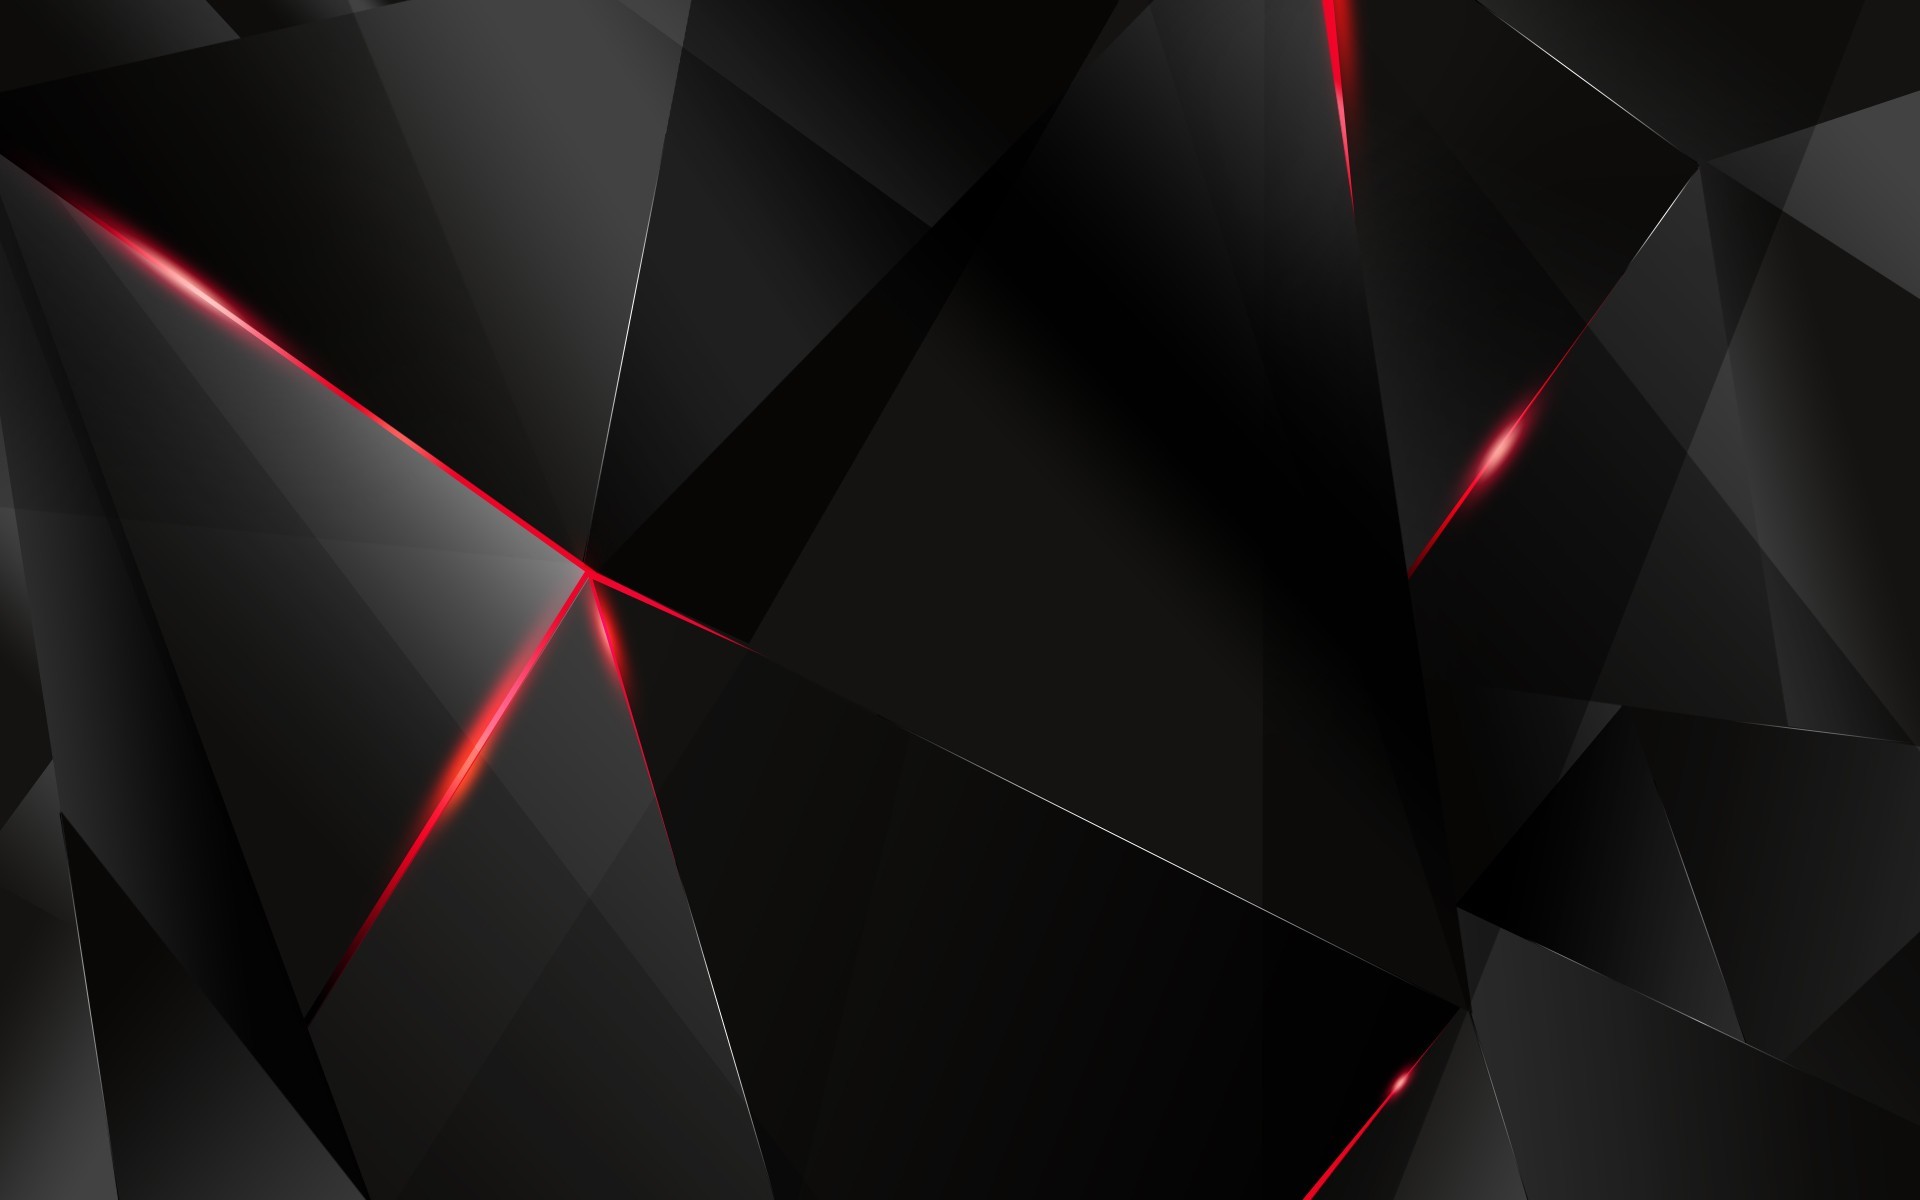 1920x1200 Red and Black Geometric Wallpaper for Computer hd background hd #6042